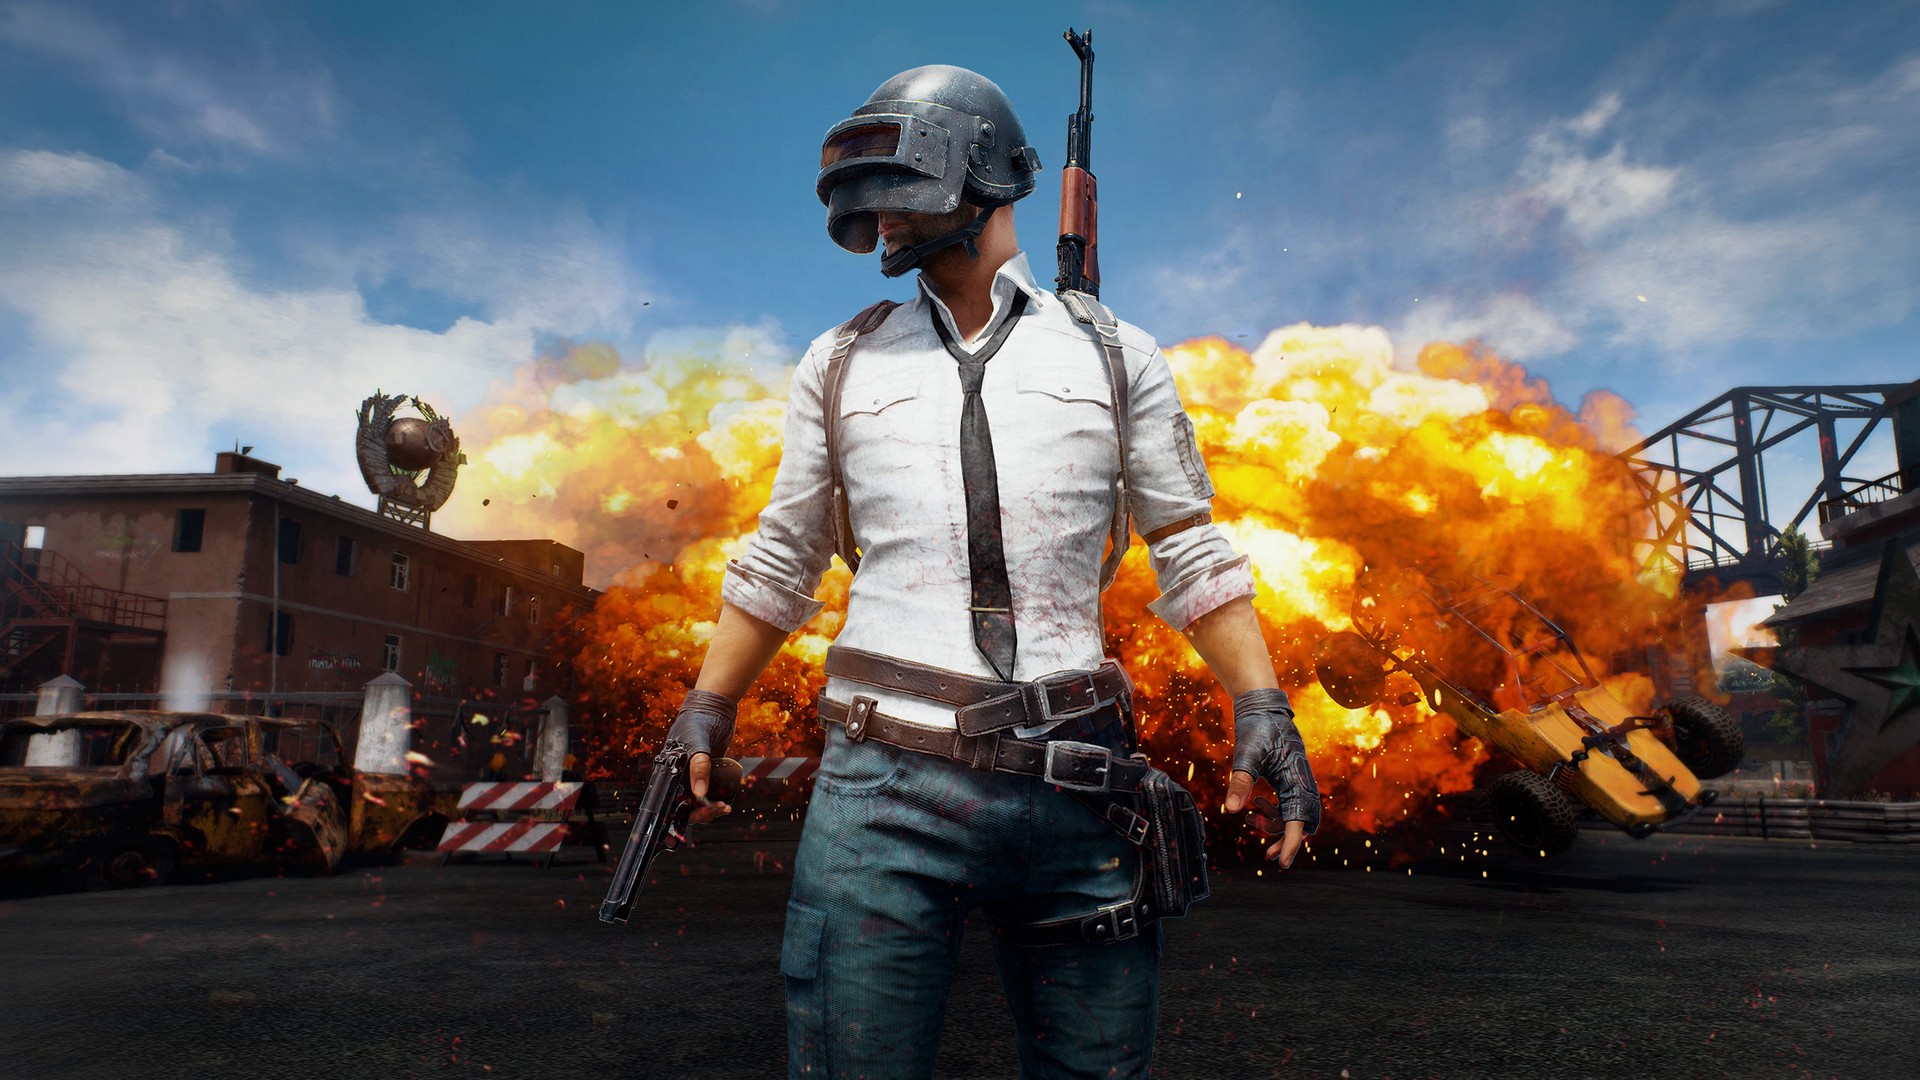 Wallpaper PUBG Desktop with image resolution 1920x1080 pixel. You can use this wallpaper as background for your desktop Computer Screensavers, Android or iPhone smartphones